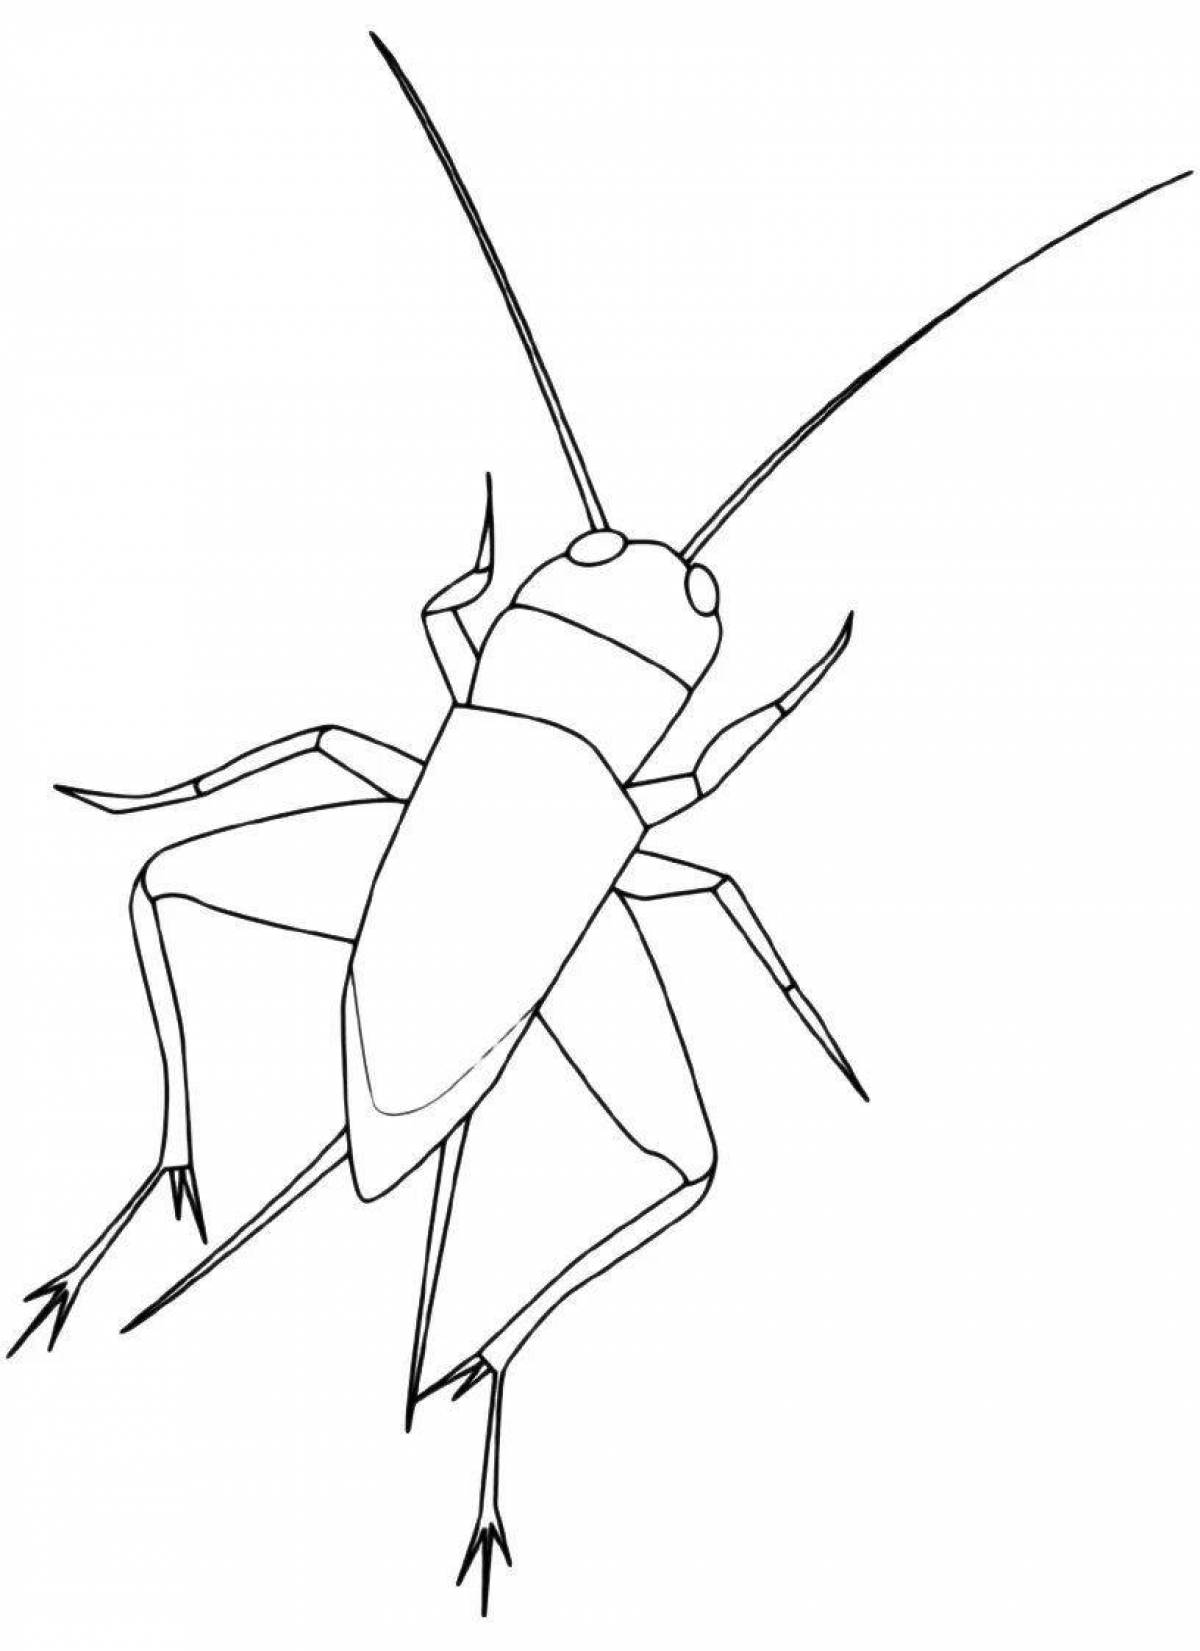 Exciting cricket coloring page